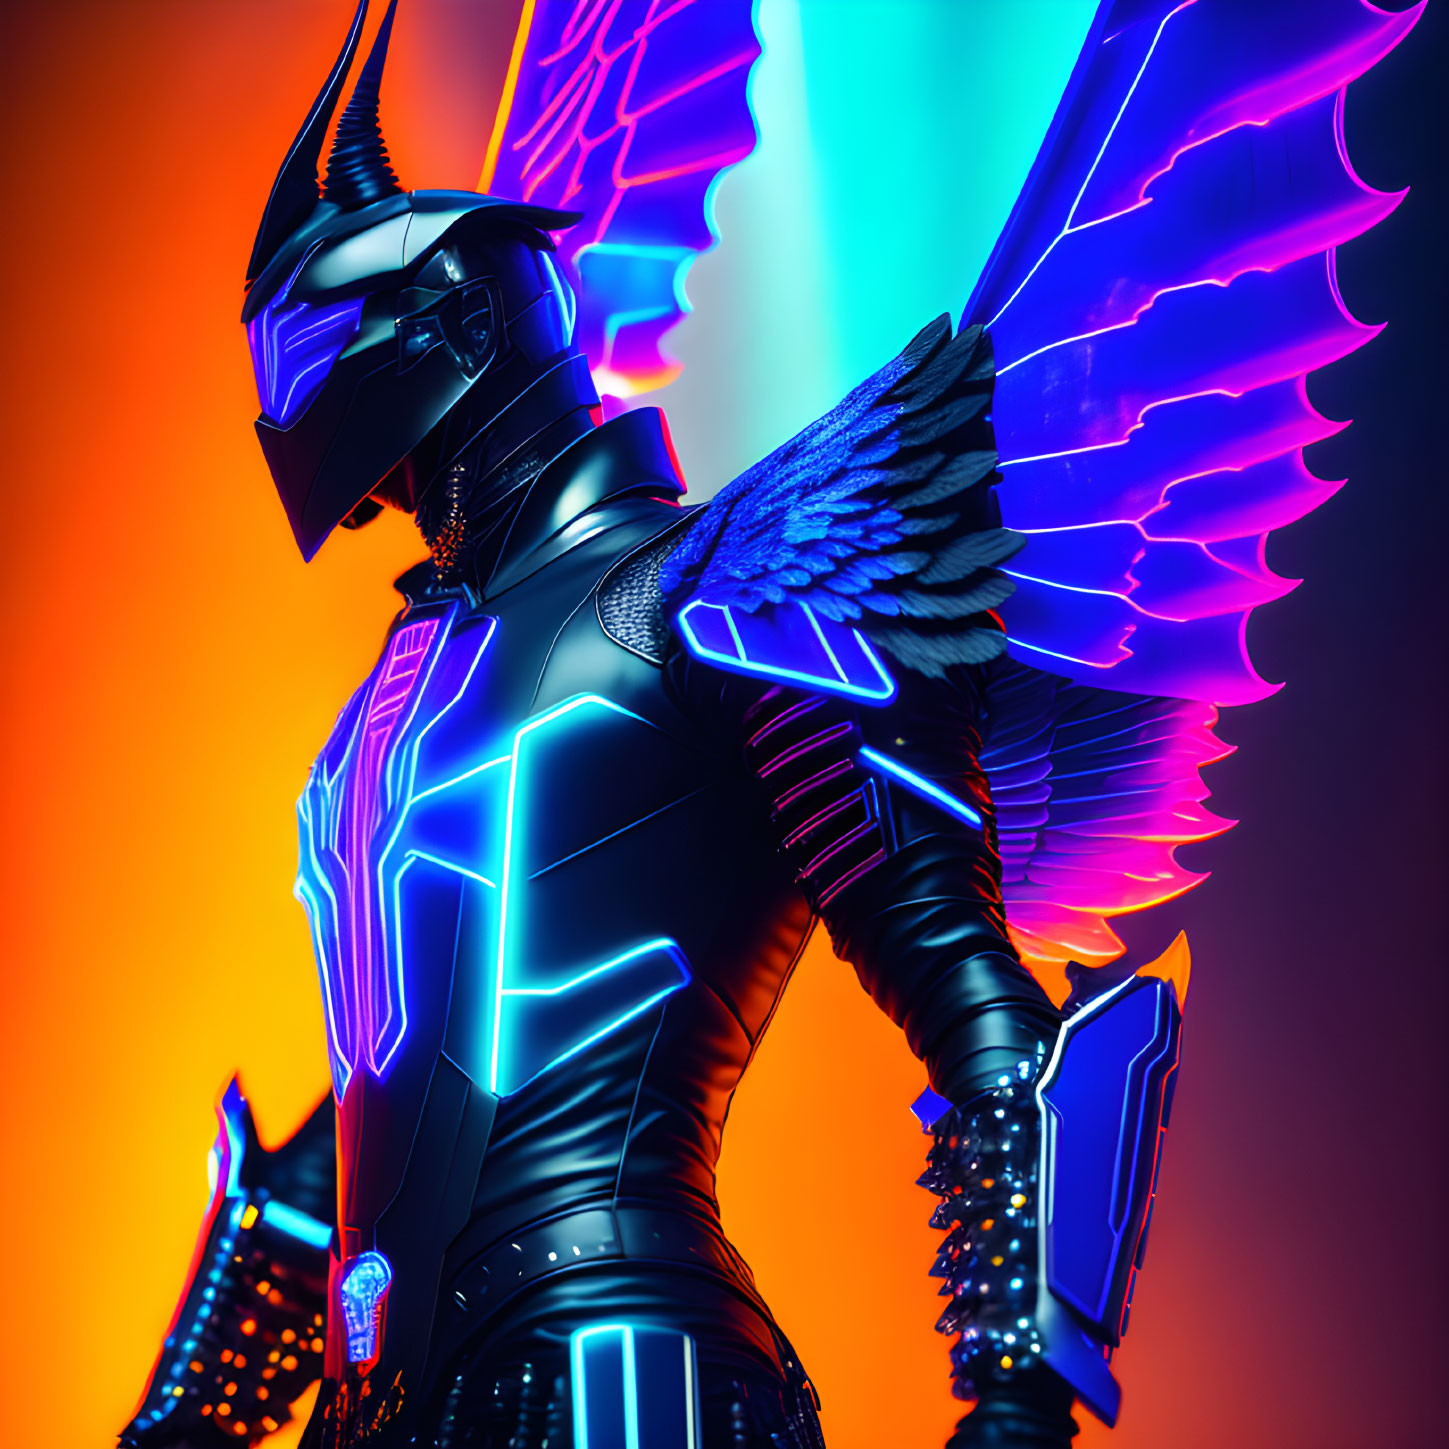 Futuristic knight in glowing blue armor with neon wings on orange and blue gradient.